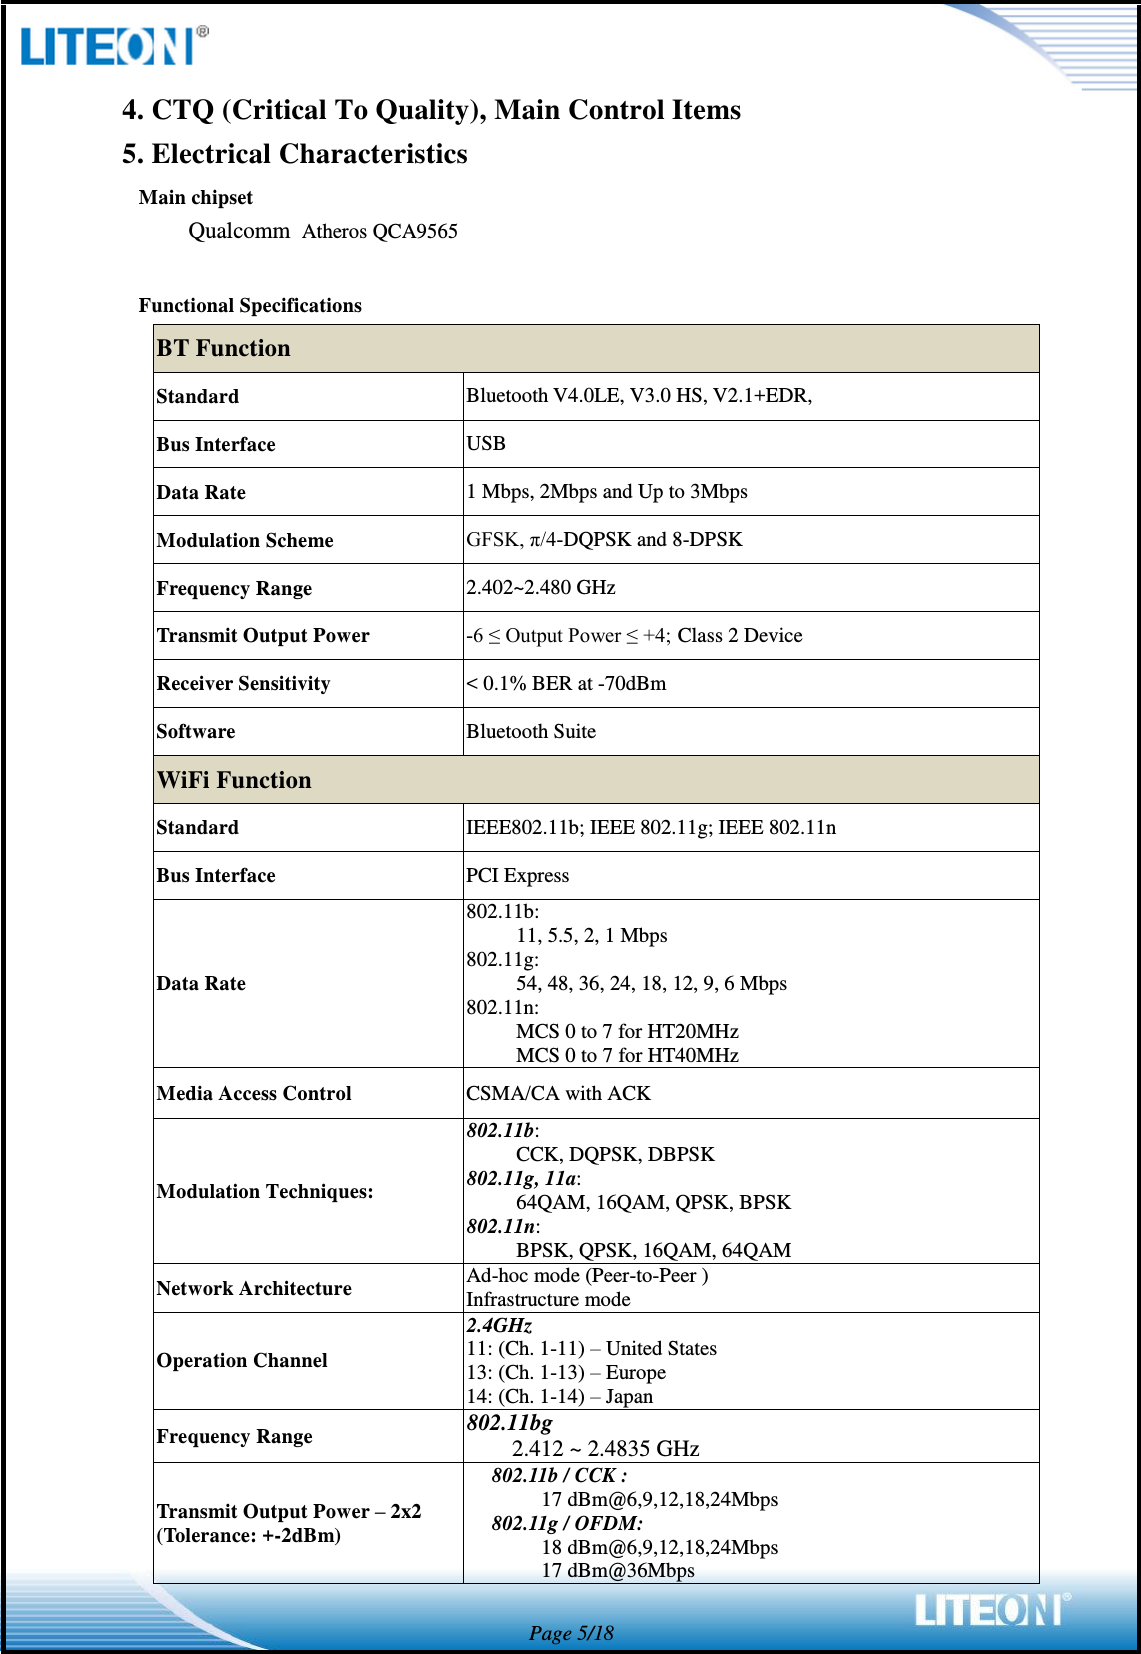  Page 5/18 4. CTQ (Critical To Quality), Main Control Items 5. Electrical Characteristics Main chipset   Qualcomm  Atheros QCA9565  Functional Specifications BT Function Standard Bluetooth V4.0LE, V3.0 HS, V2.1+EDR, Bus Interface USB Data Rate 1 Mbps, 2Mbps and Up to 3Mbps Modulation Scheme GFSK, π/4-DQPSK and 8-DPSK Frequency Range 2.402~2.480 GHz Transmit Output Power -6 ≤ Output Power ≤ +4; Class 2 Device Receiver Sensitivity &lt; 0.1% BER at -70dBm Software Bluetooth Suite WiFi Function Standard   IEEE802.11b; IEEE 802.11g; IEEE 802.11n Bus Interface PCI Express Data Rate 802.11b: 11, 5.5, 2, 1 Mbps 802.11g: 54, 48, 36, 24, 18, 12, 9, 6 Mbps 802.11n: MCS 0 to 7 for HT20MHz MCS 0 to 7 for HT40MHz Media Access Control CSMA/CA with ACK Modulation Techniques: 802.11b: CCK, DQPSK, DBPSK 802.11g, 11a: 64QAM, 16QAM, QPSK, BPSK 802.11n: BPSK, QPSK, 16QAM, 64QAM Network Architecture Ad-hoc mode (Peer-to-Peer ) Infrastructure mode Operation Channel 2.4GHz 11: (Ch. 1-11) – United States 13: (Ch. 1-13) – Europe 14: (Ch. 1-14) – Japan Frequency Range 802.11bg 2.412 ~ 2.4835 GHz Transmit Output Power – 2x2 (Tolerance: +-2dBm) 802.11b / CCK : 17 dBm@6,9,12,18,24Mbps 802.11g / OFDM: 18 dBm@6,9,12,18,24Mbps 17 dBm@36Mbps 